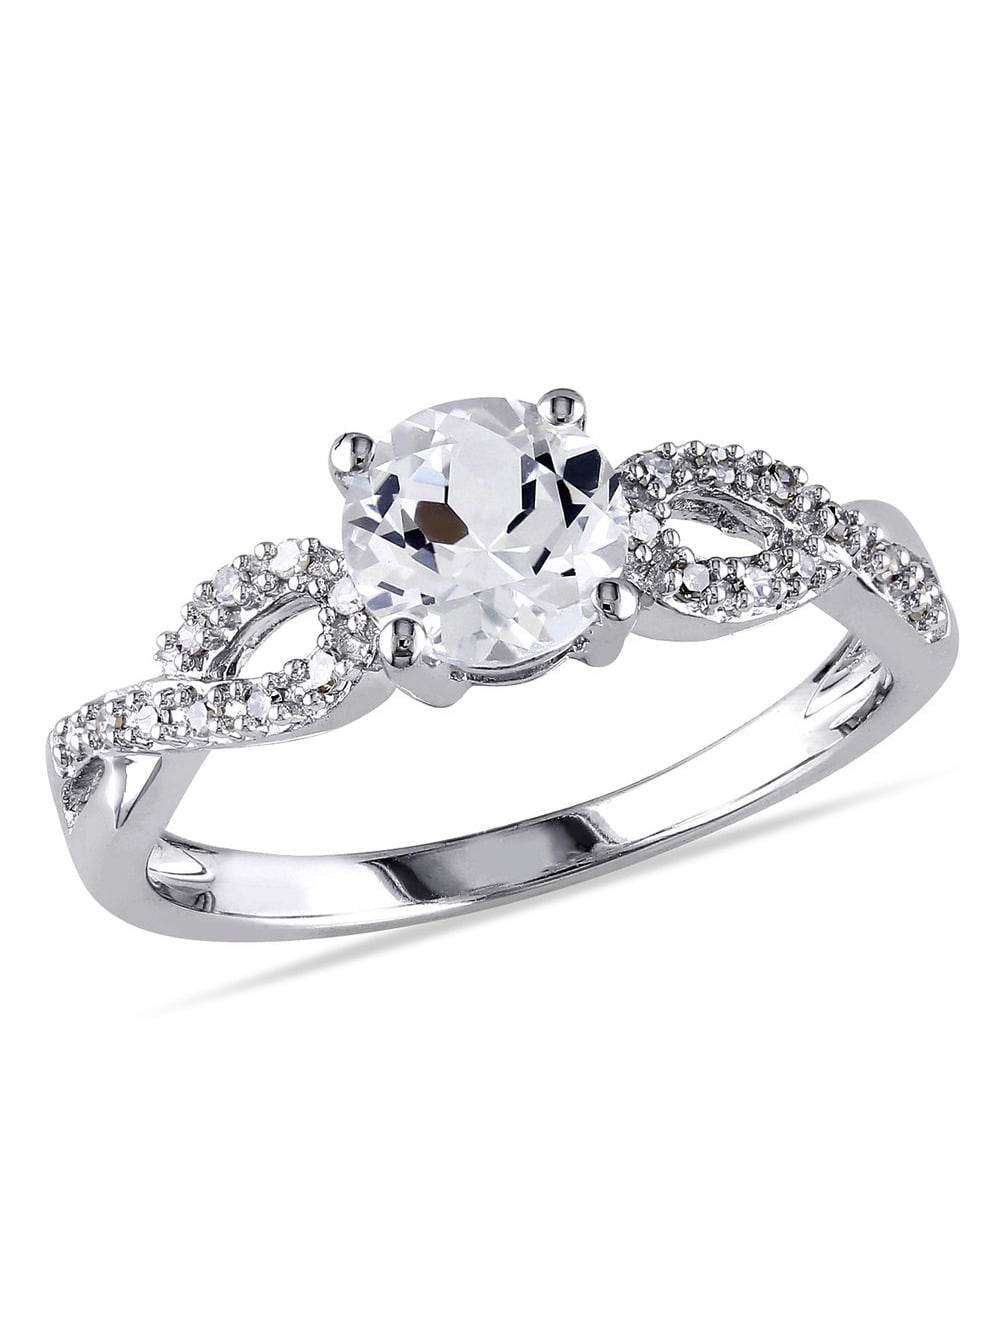 1.00 Carat Lab Created White Sapphire Halo Engagement Ring in 10K White Gold with Diamonds ctw 